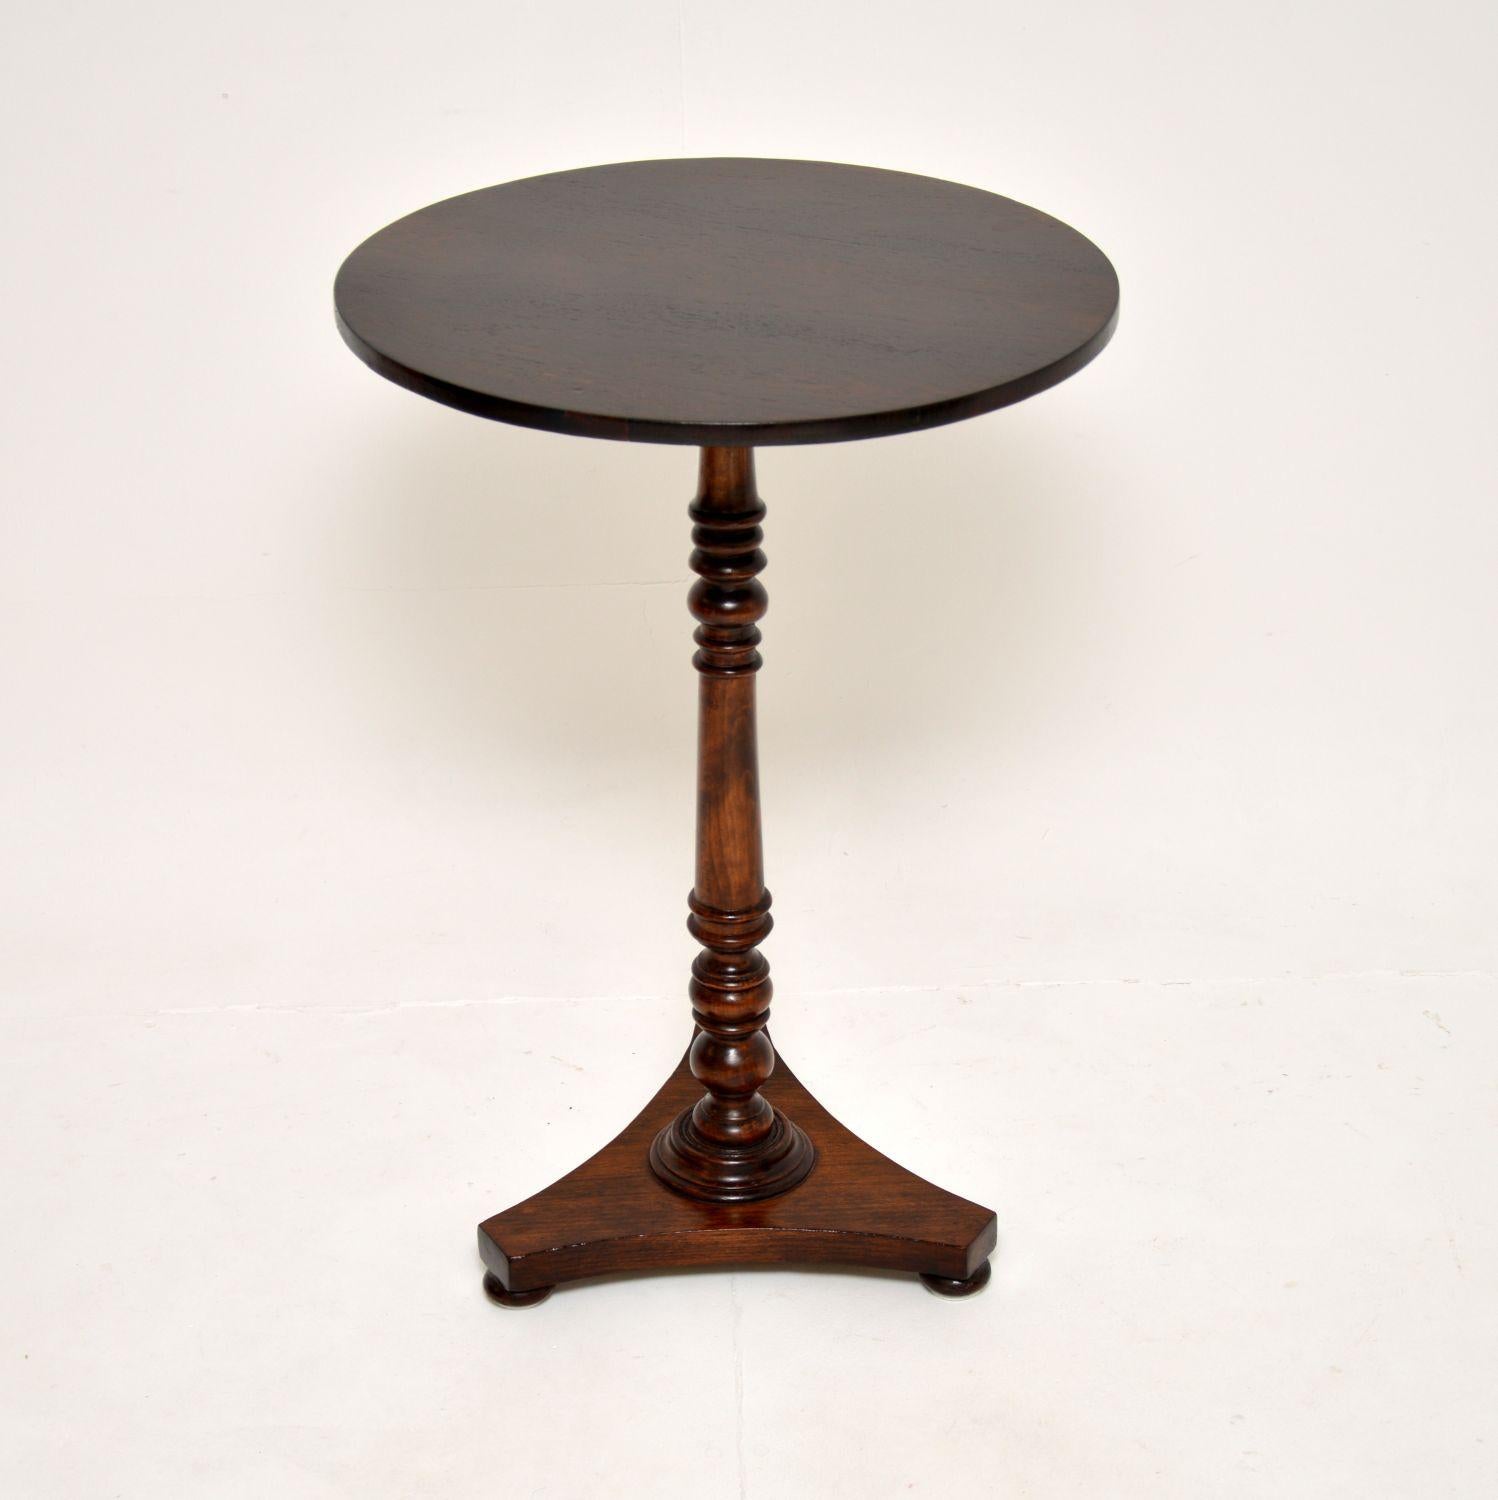 A beautifully made antique William IV occasional table. This was made in England, it dates from around the 1830-1840 period.

It is of superb quality, with a circular top, siting on a nicely turned gun barrel column and a tripod platform base.

We